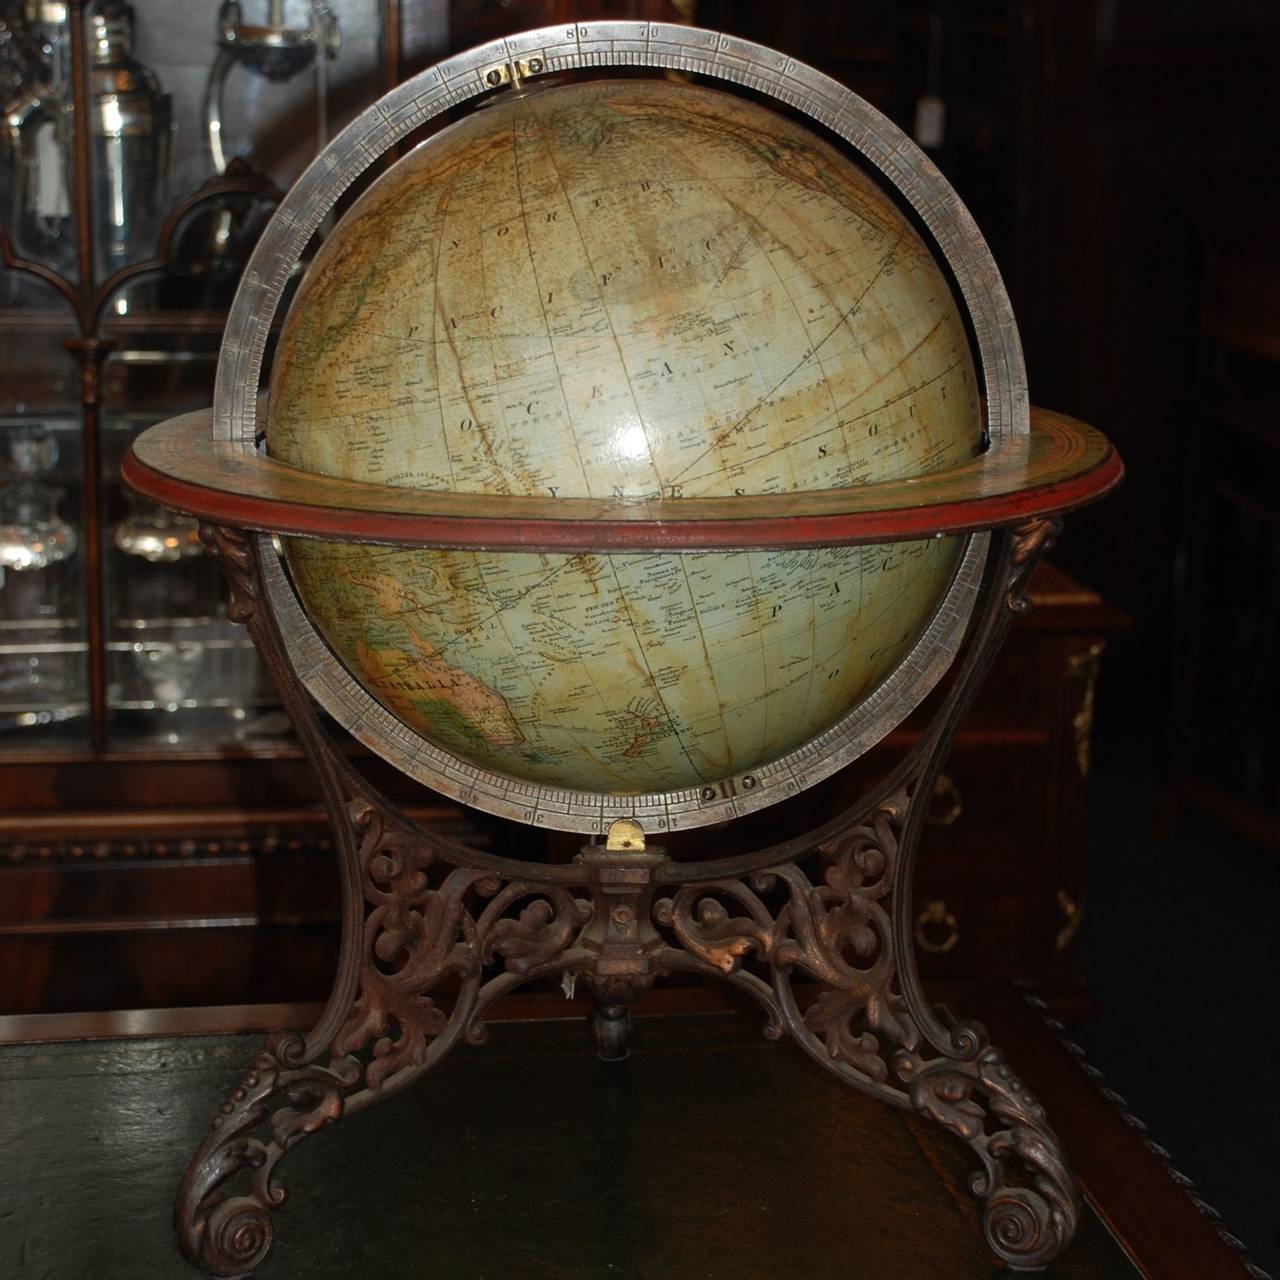 Antique French Terrestrial Globe on Cast Iron Base that was imported to NYC by J Schedler